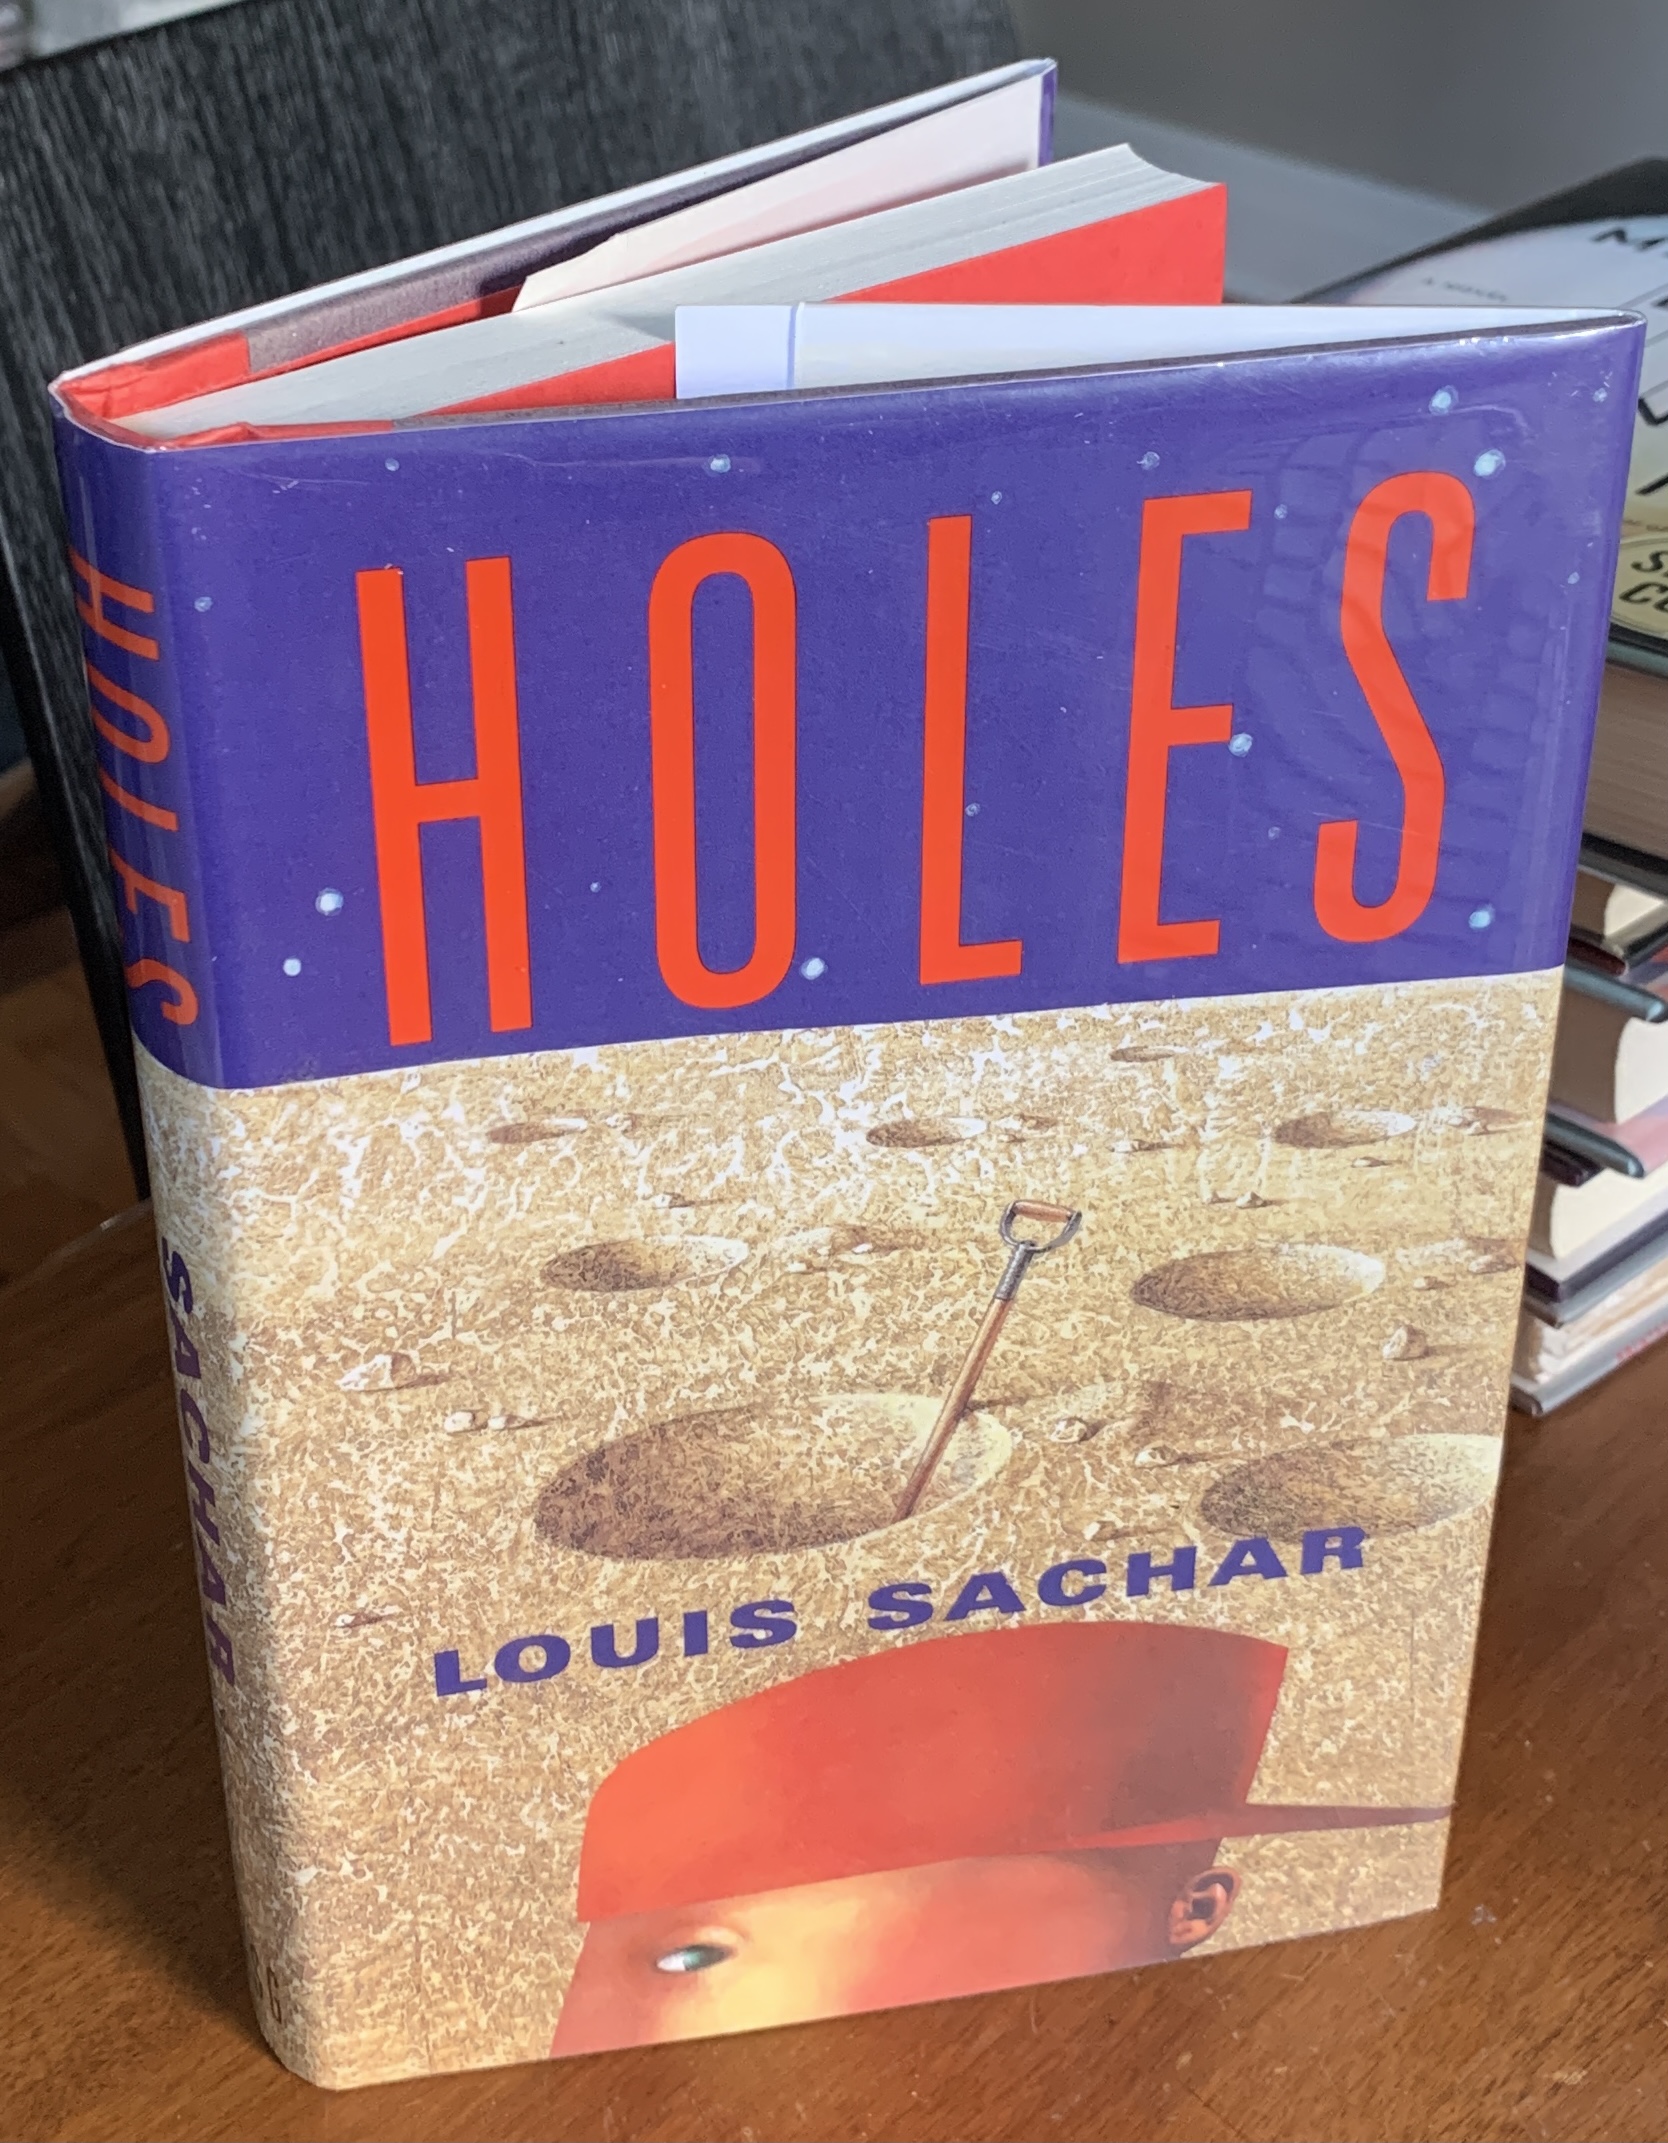 Holes **SIGNED FIRST PRINTING** by Sachar, Louis: As New Hardcover (1998)  1st Edition, Signed by Author(s)